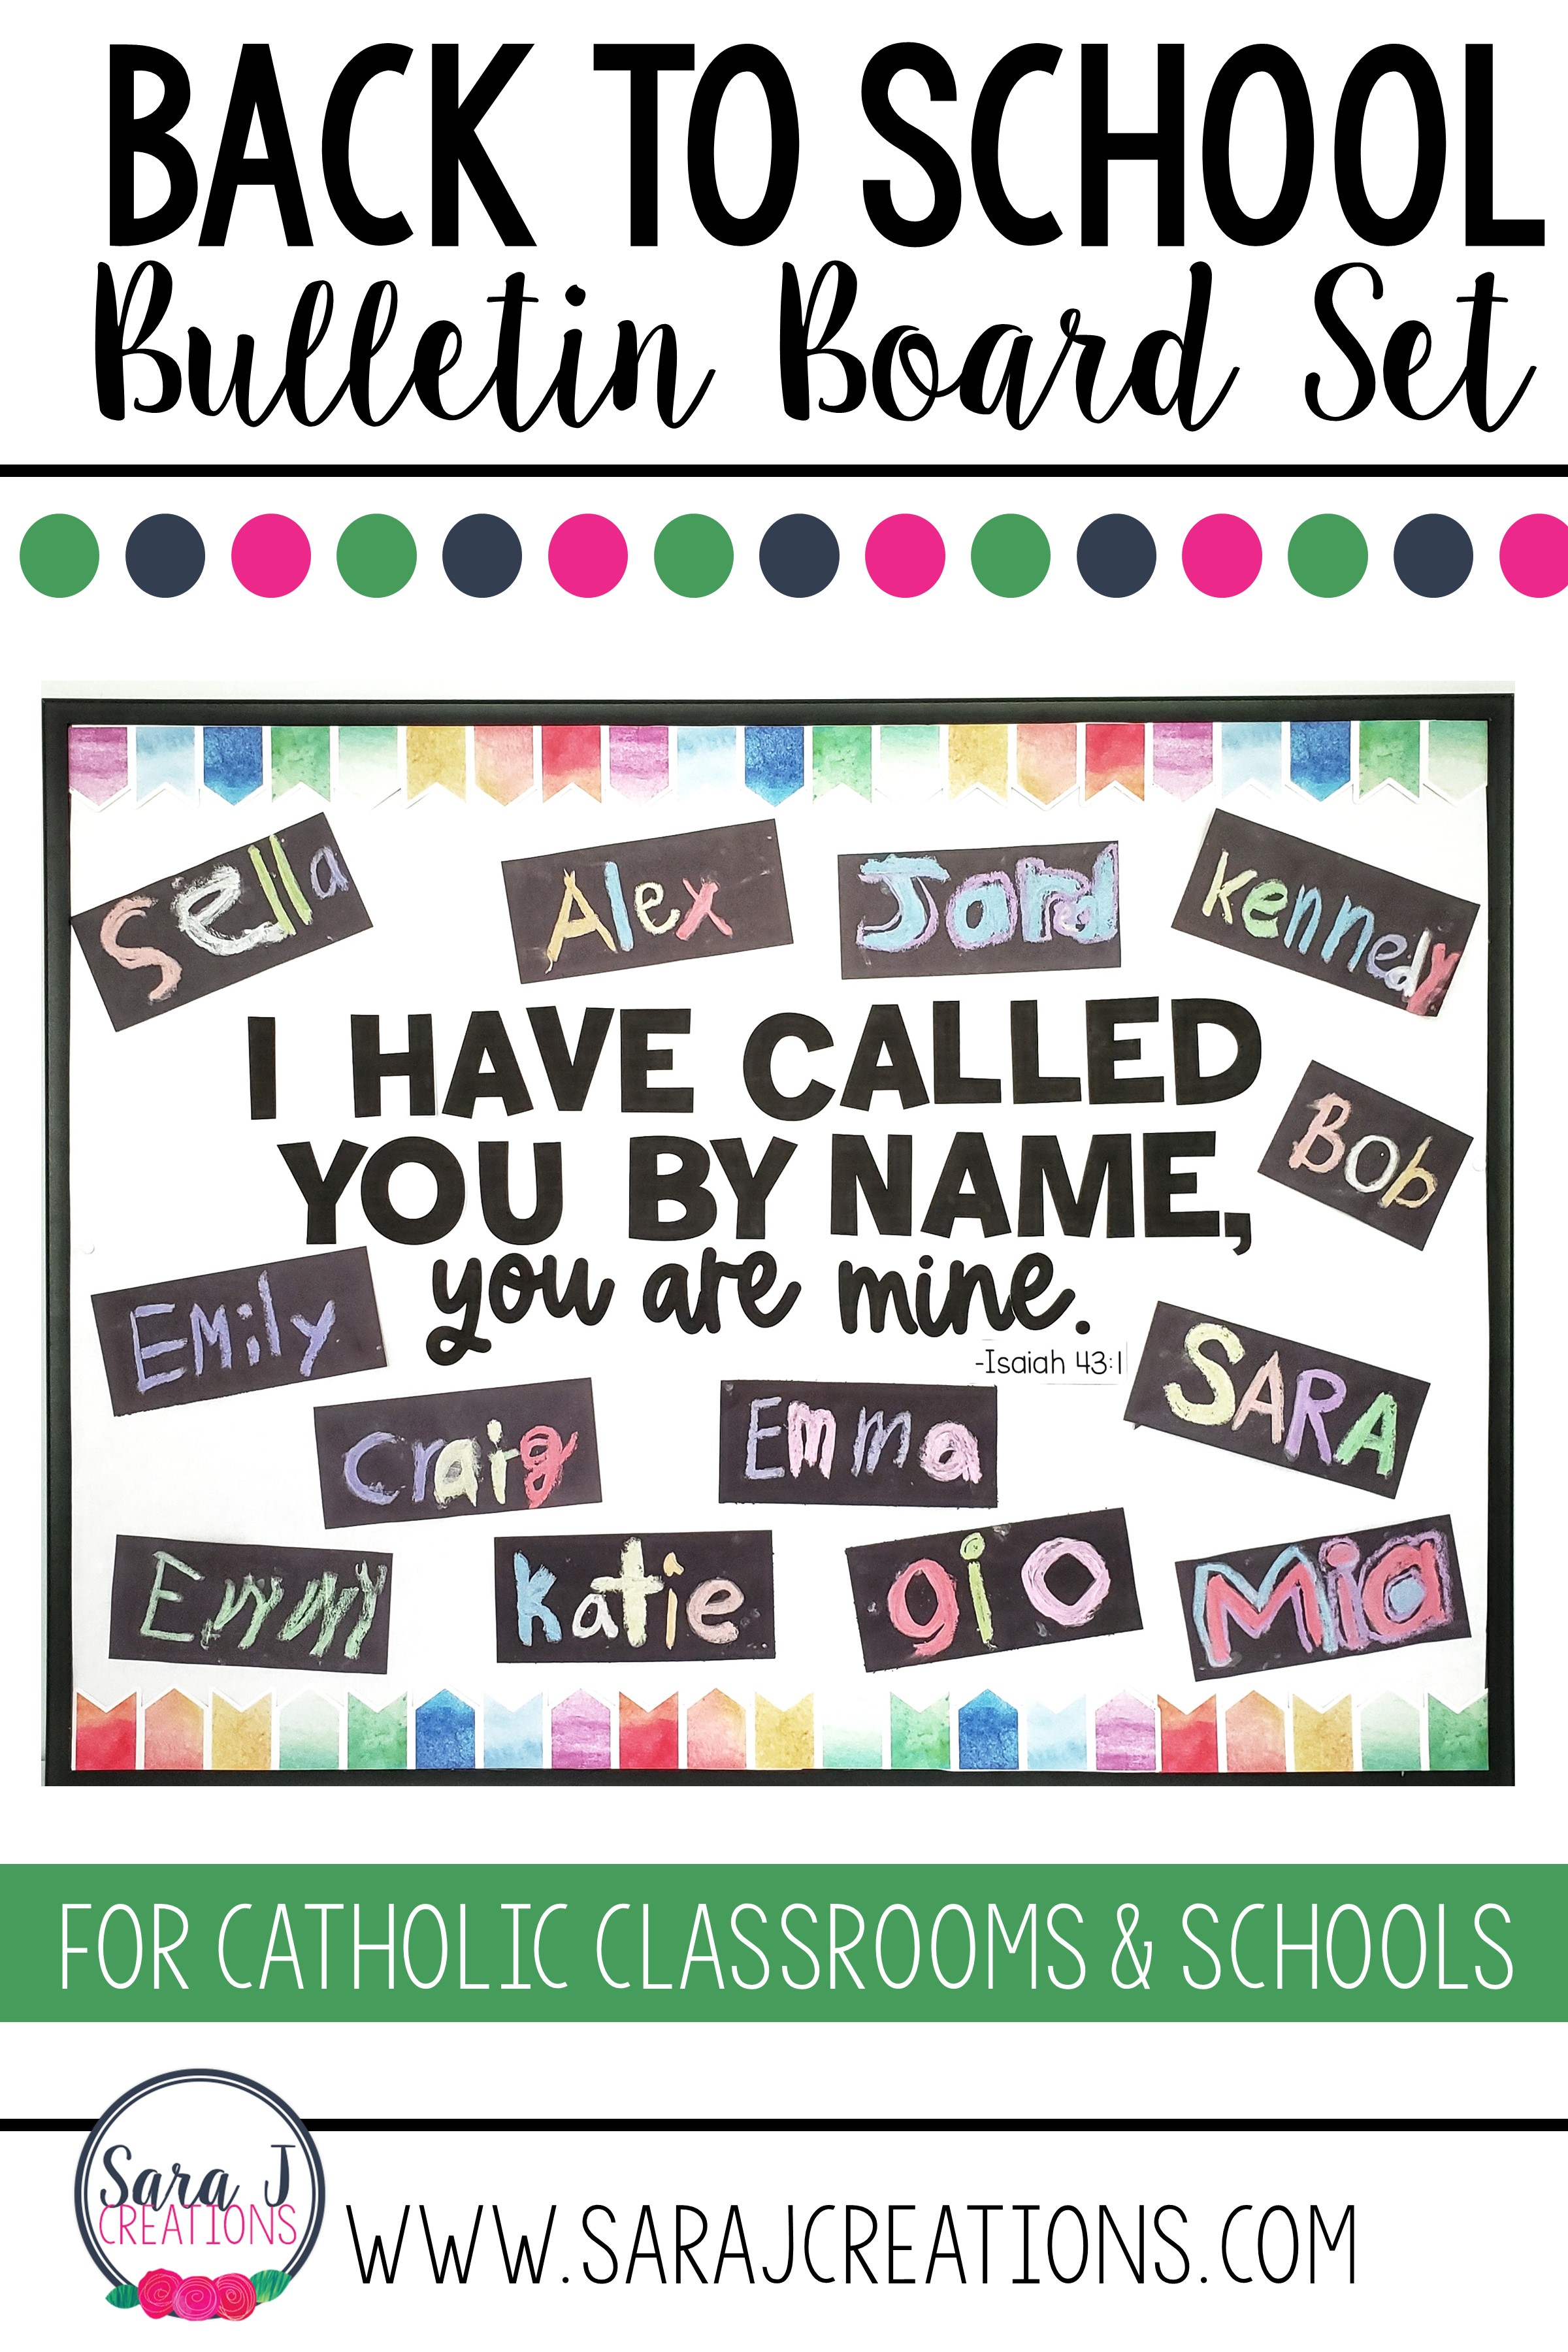 Use student names to decorate this scripture verse. Perfect for back to school for a Catholic classroom.